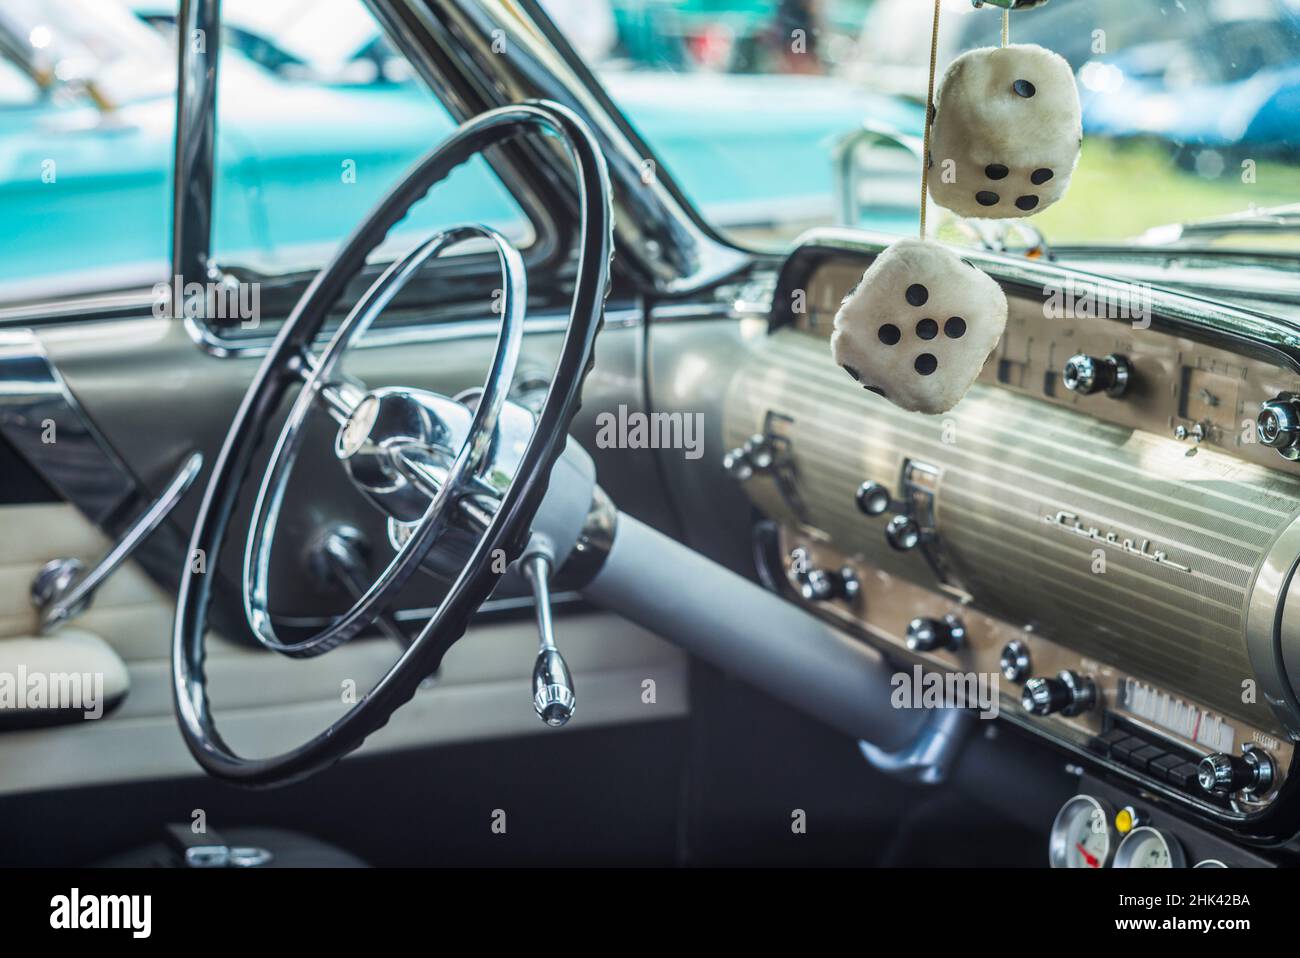 USA, Massachusetts, Gloucester. Fuzzy dice with US flag in 1950s-era  convertible, antique car show Stock Photo - Alamy